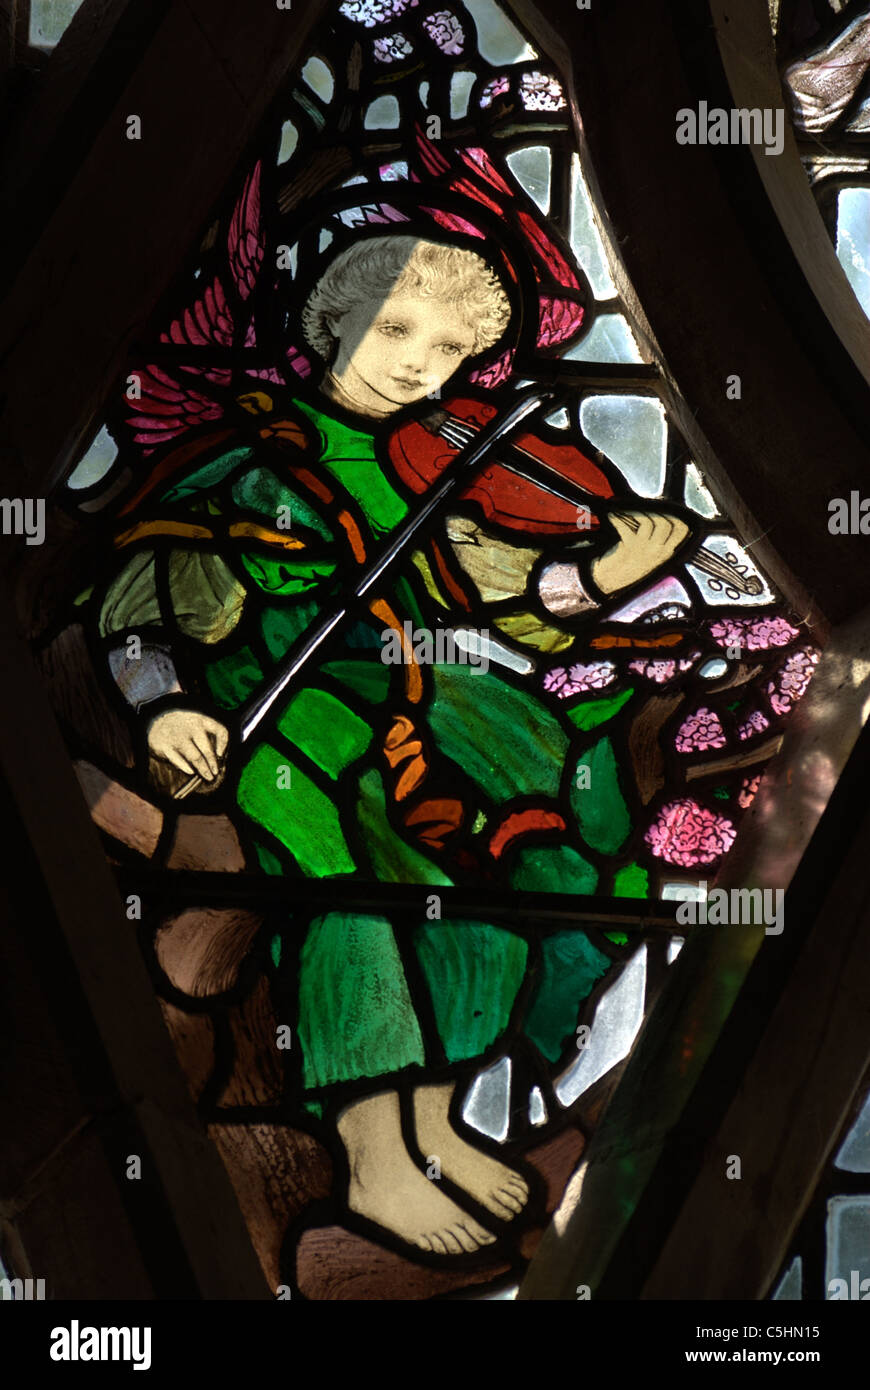 Section of stained glass depicting a musician Stock Photo